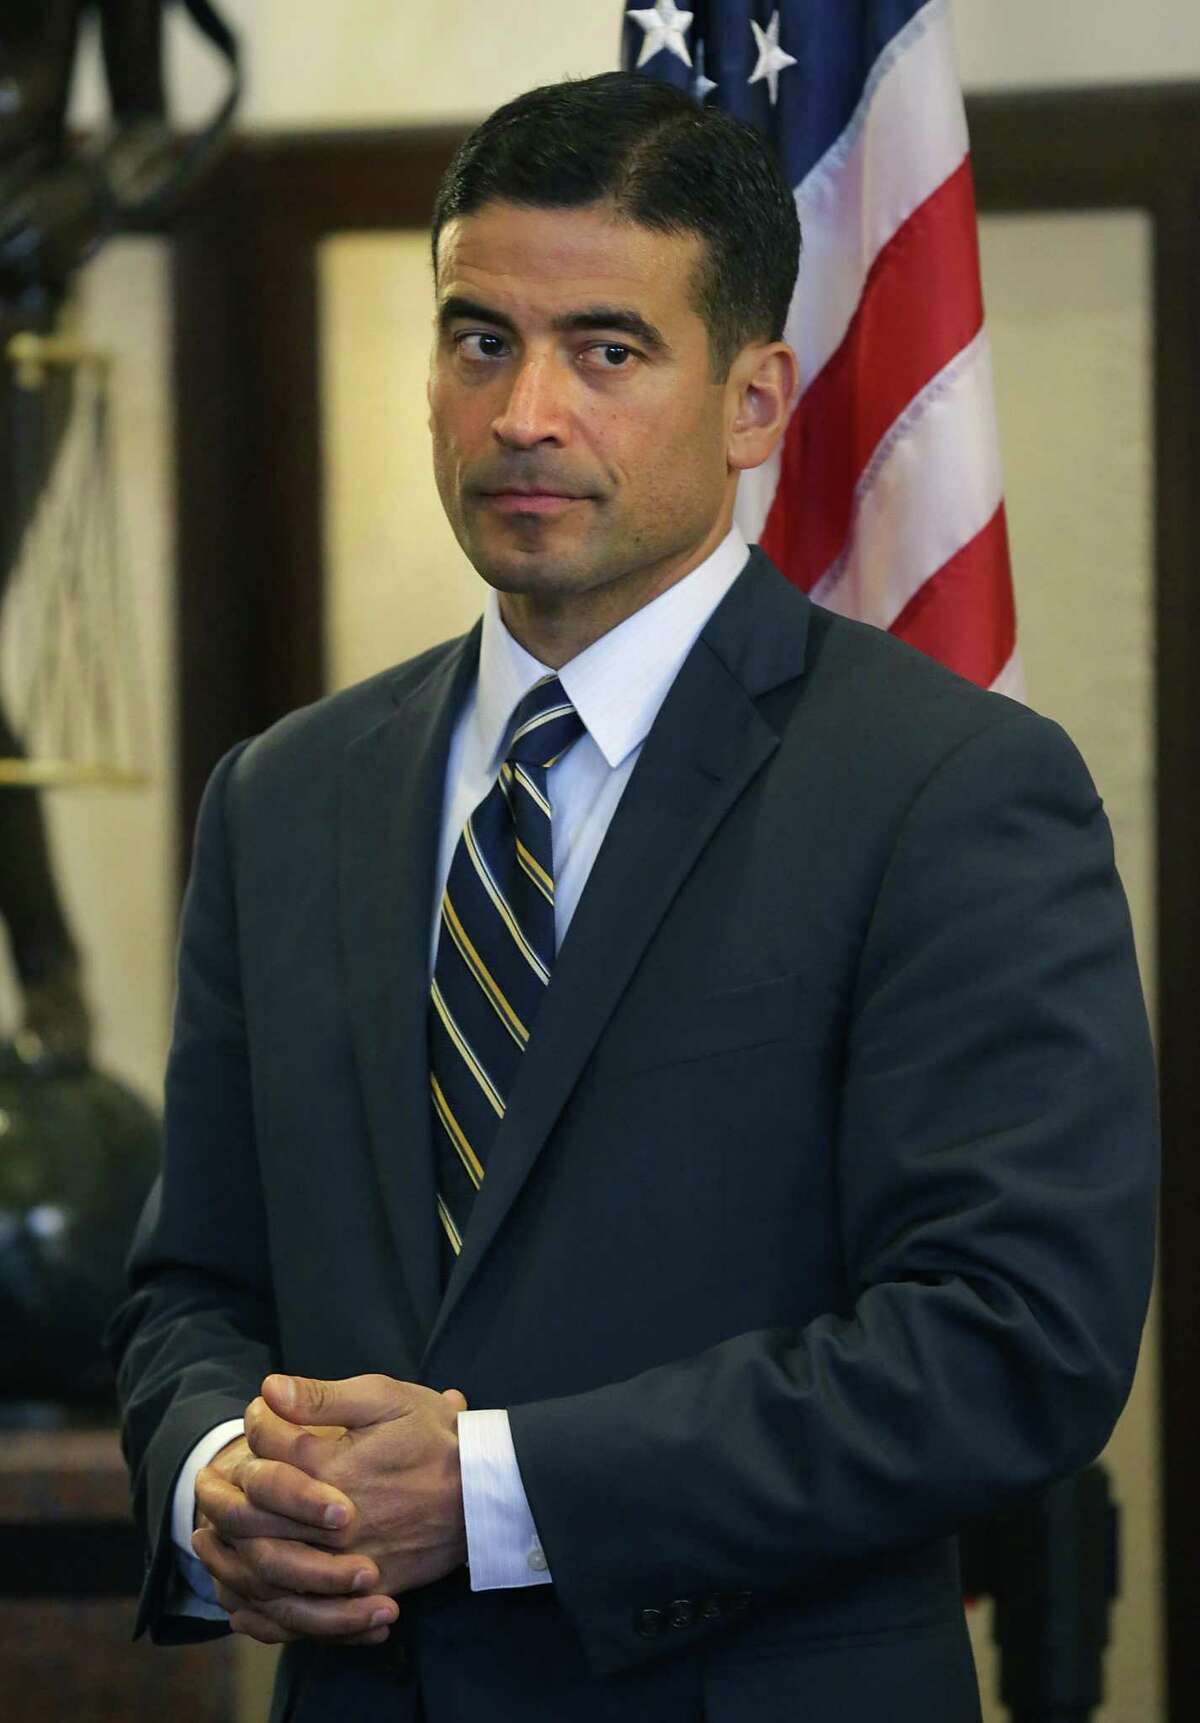 A source said Bexar County District Attorney Nico LaHood has waived his right to a trial in district court, opting instead for a closed hearing before a panel of a grievance committee.